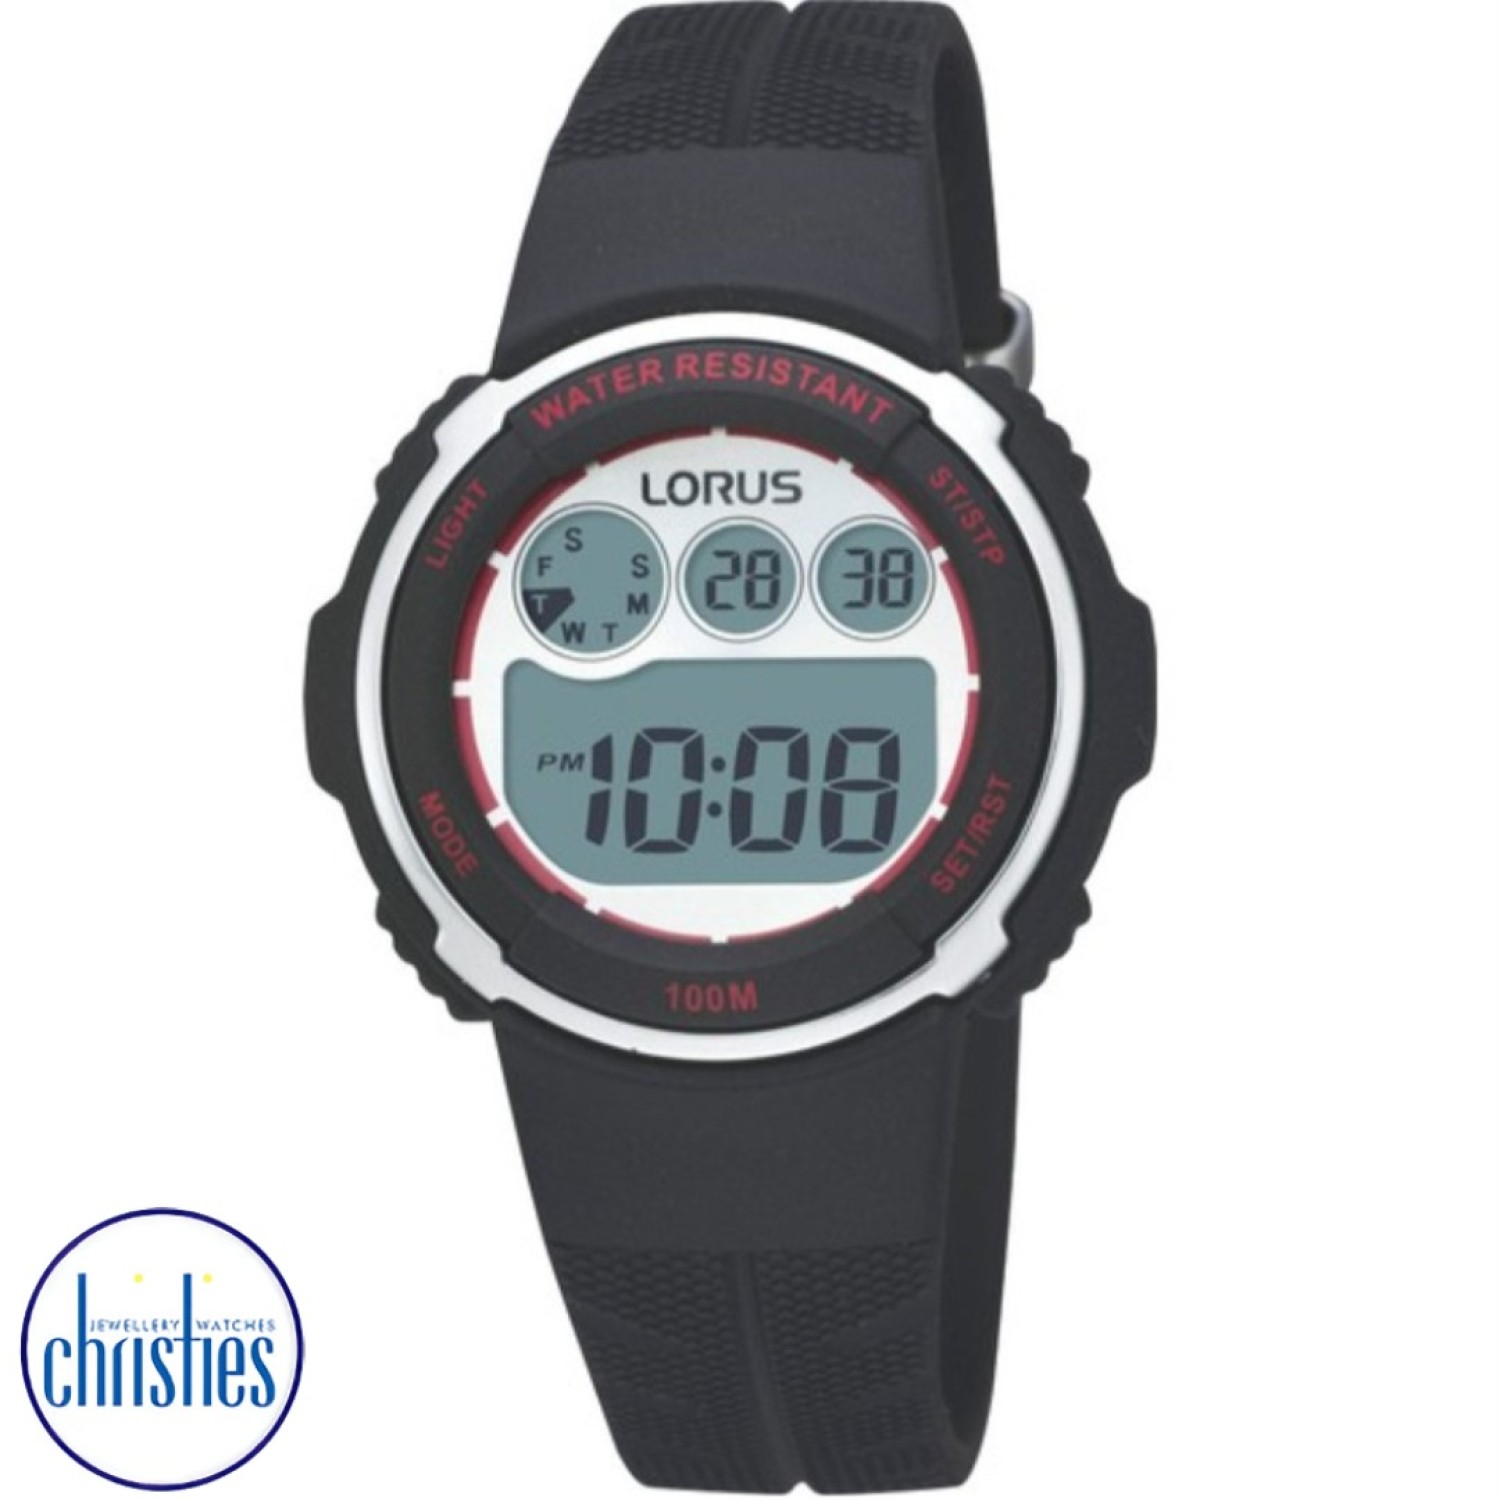 R2393CX-9 Lorus Youth Digital Watch R2393CX-9 Lorus by Seiko Auckland s offers a diverse range of watch styles, including analog, digital, sports, and dress watches